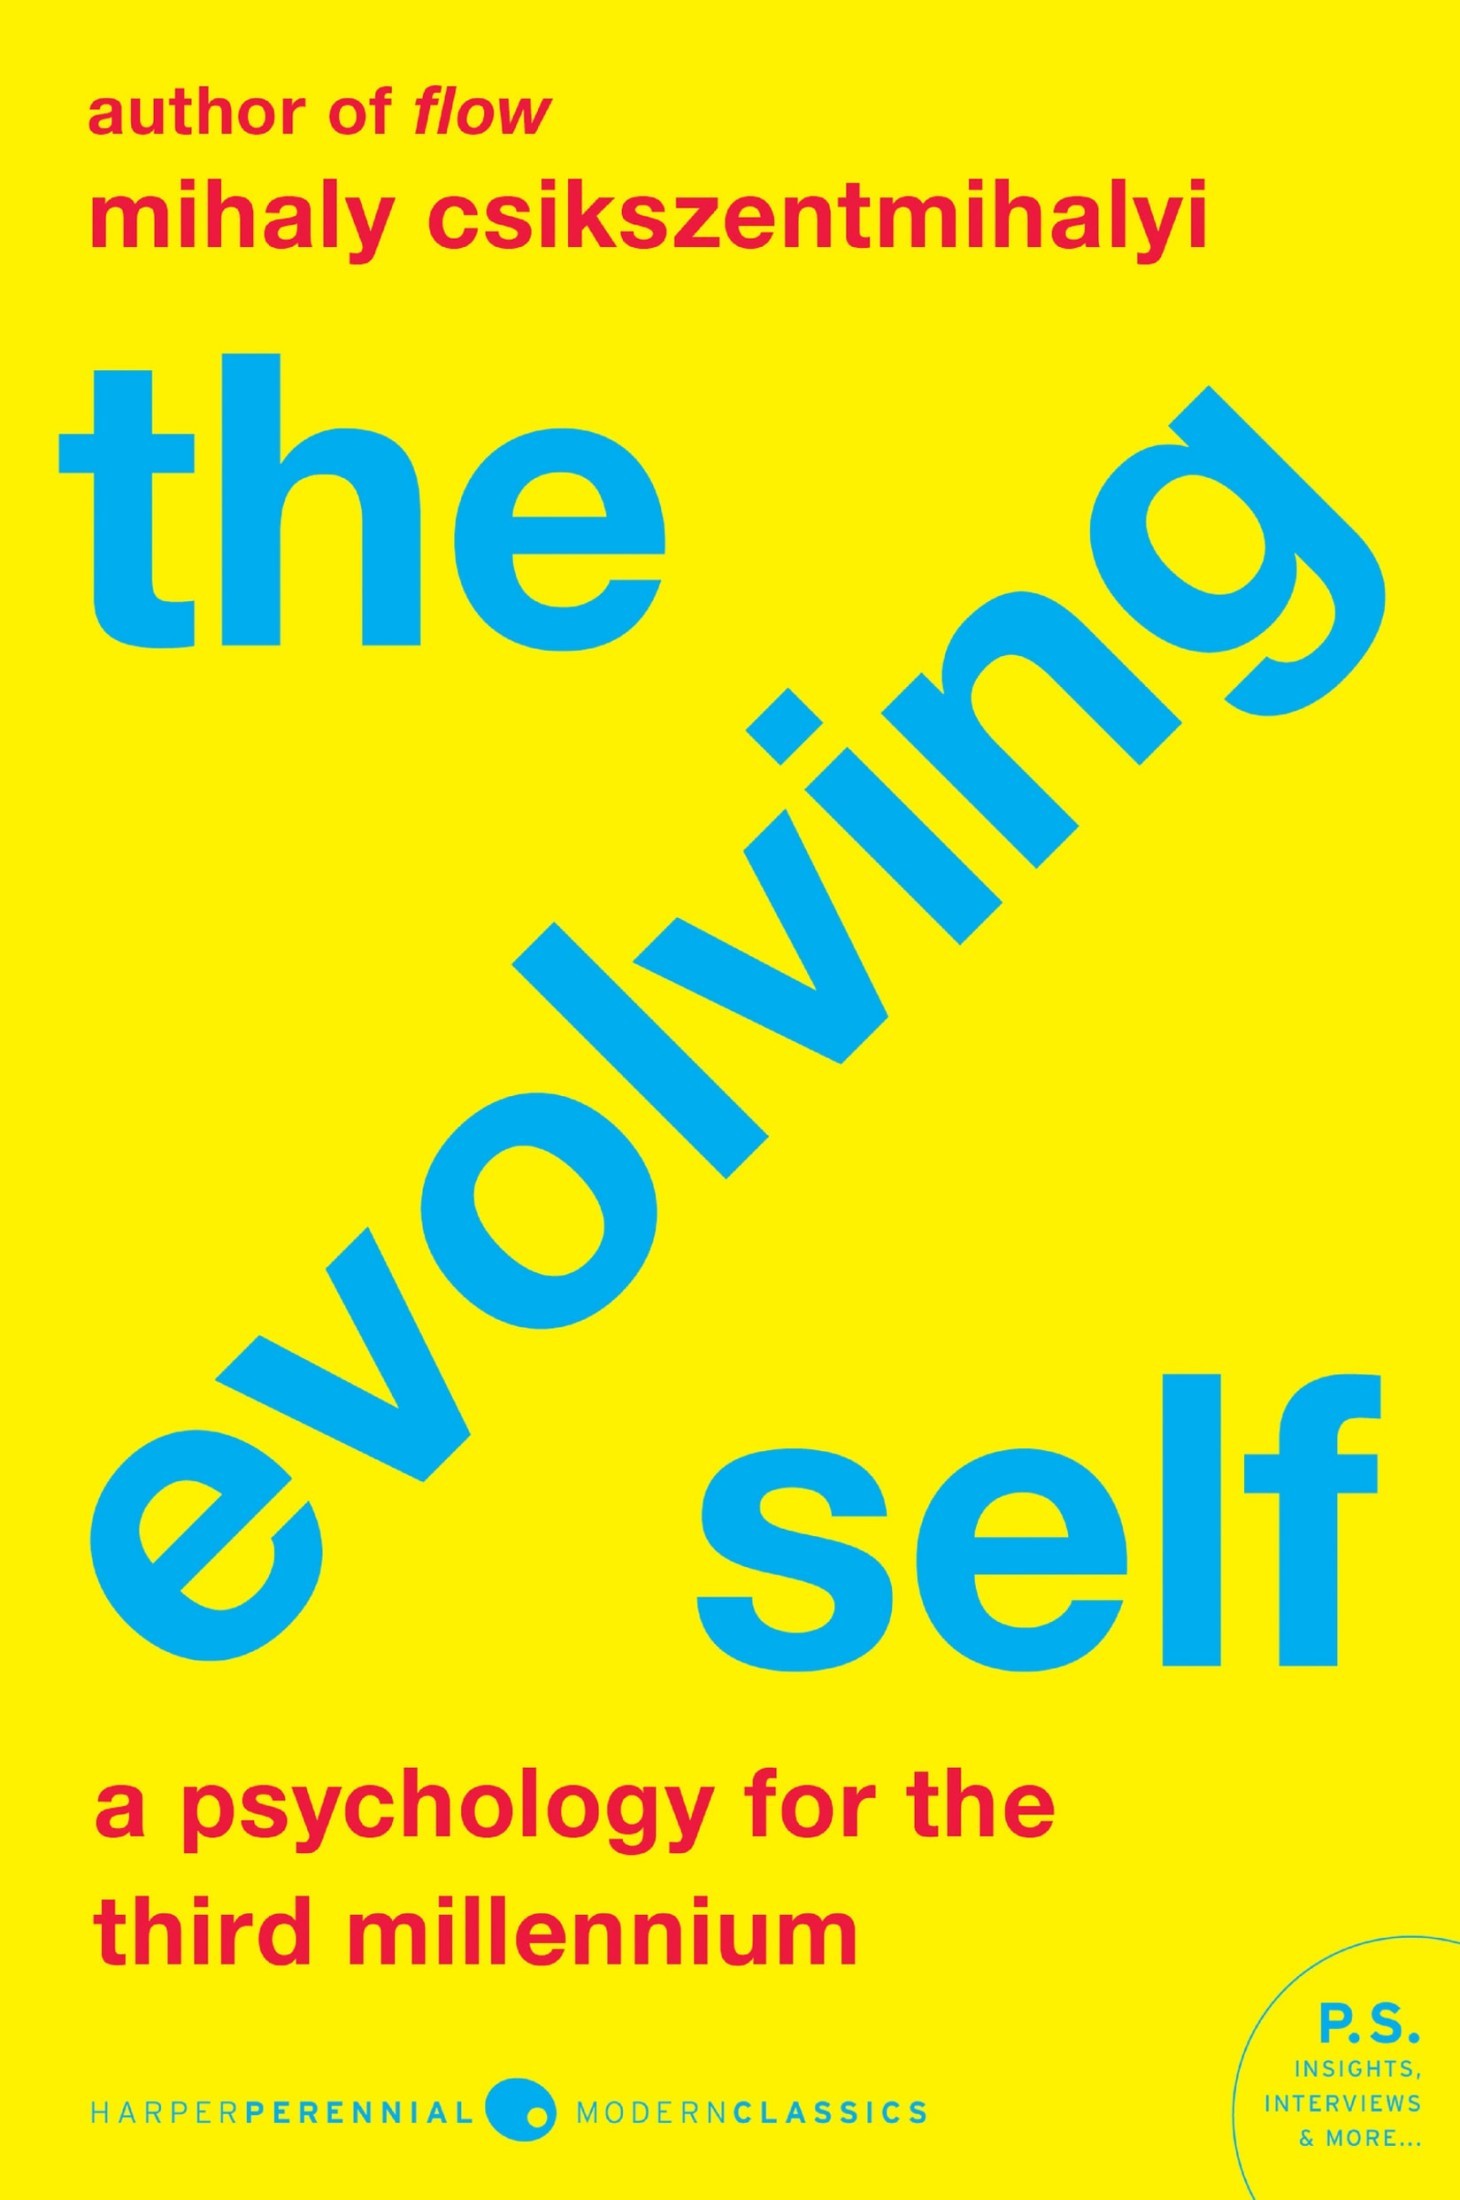 The Evolving Self: A Psychology for the Third Millennium